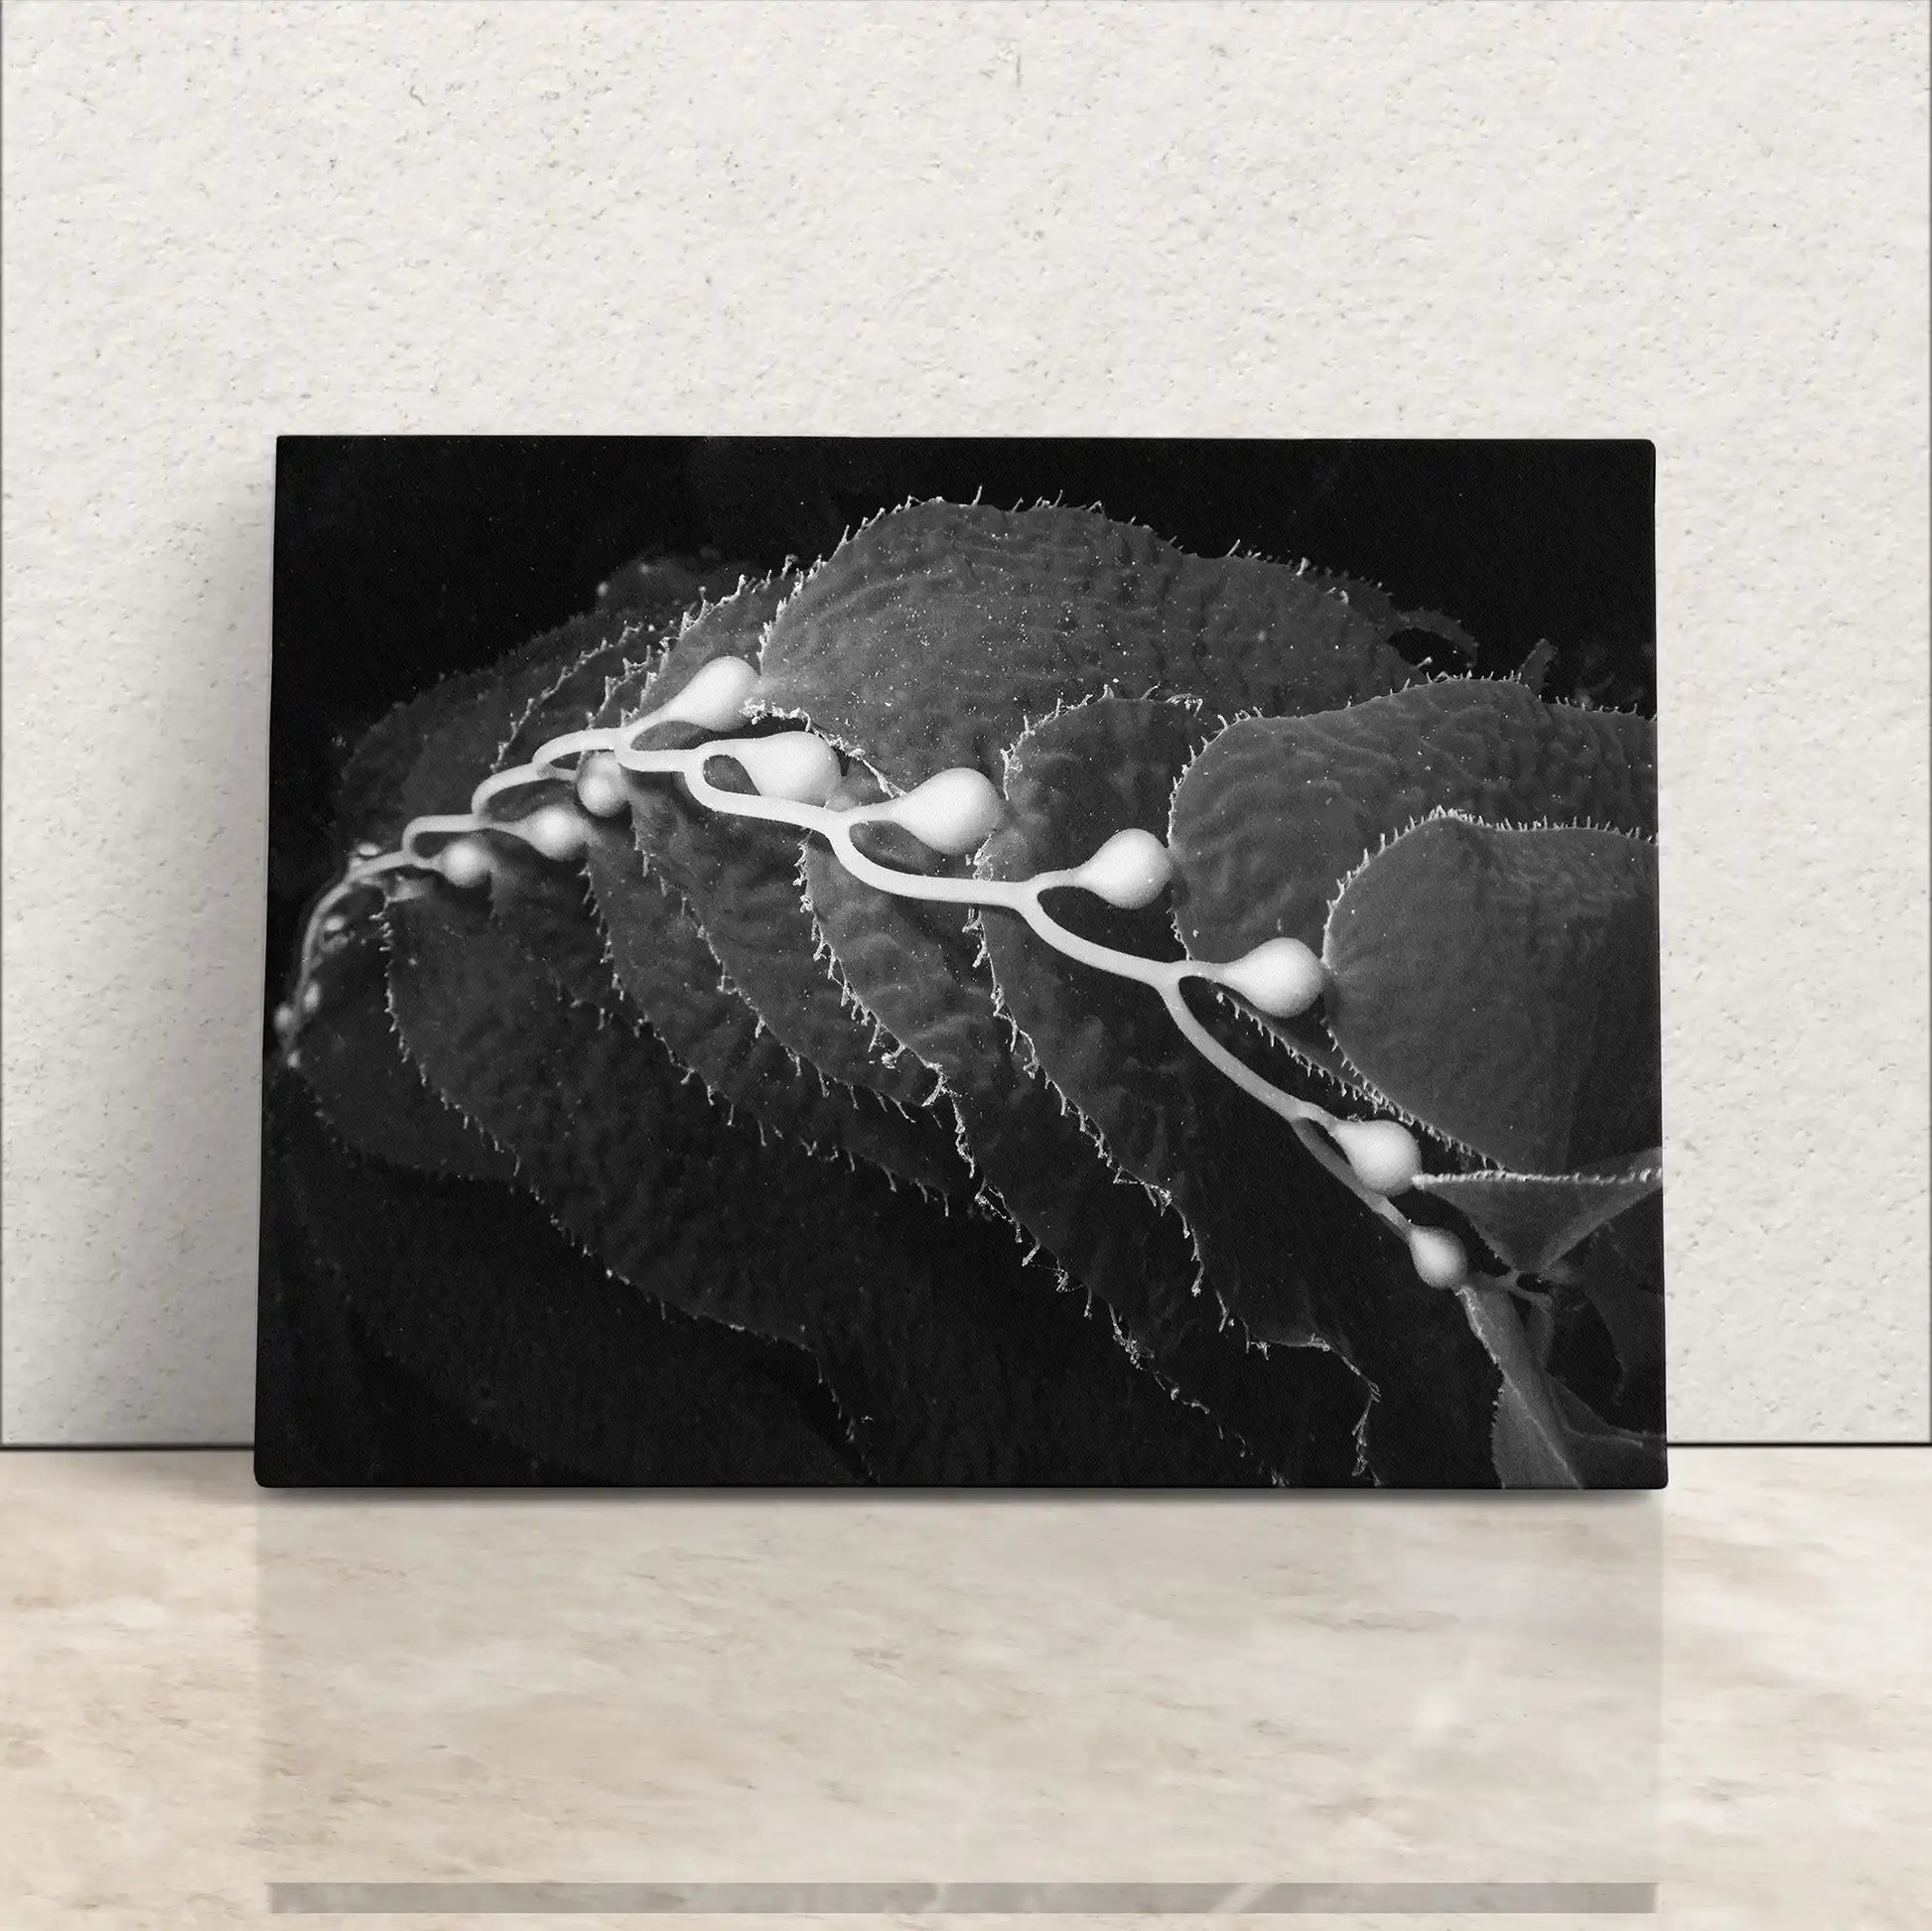 A canvas print leaning against a wall featuring a black and white underwater kelp scene.